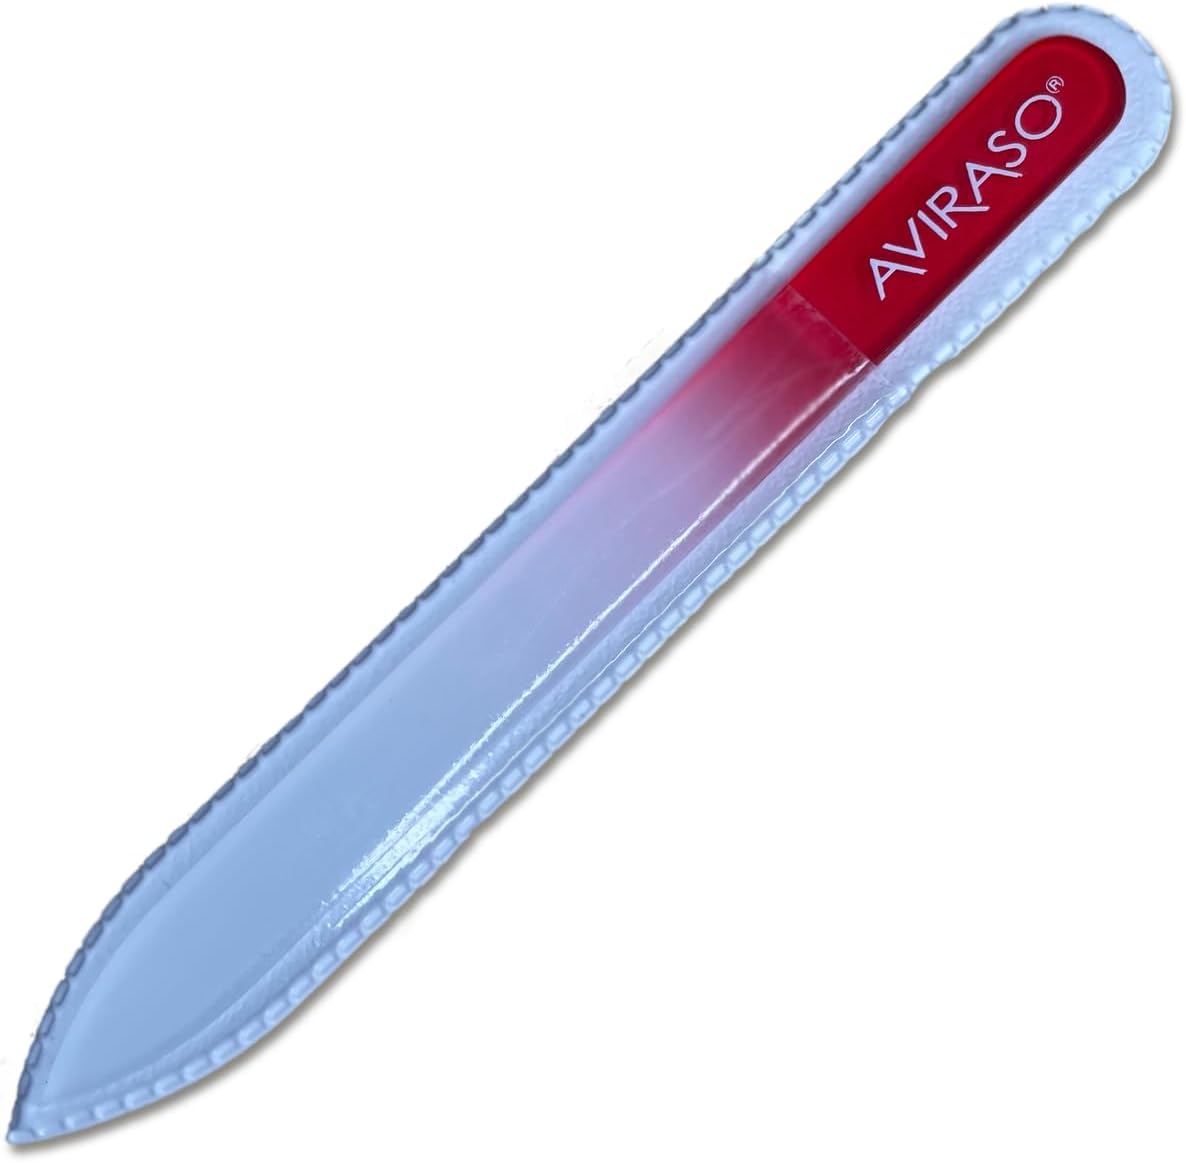 AVIRASO Original Premium Bohemia Crystal Glass Nail File on Both Sides with Protective Cover for All Nails - 14 cm - Manicure - Gentle Precision Files - Glass File Smooths and Protects Nails (Red)